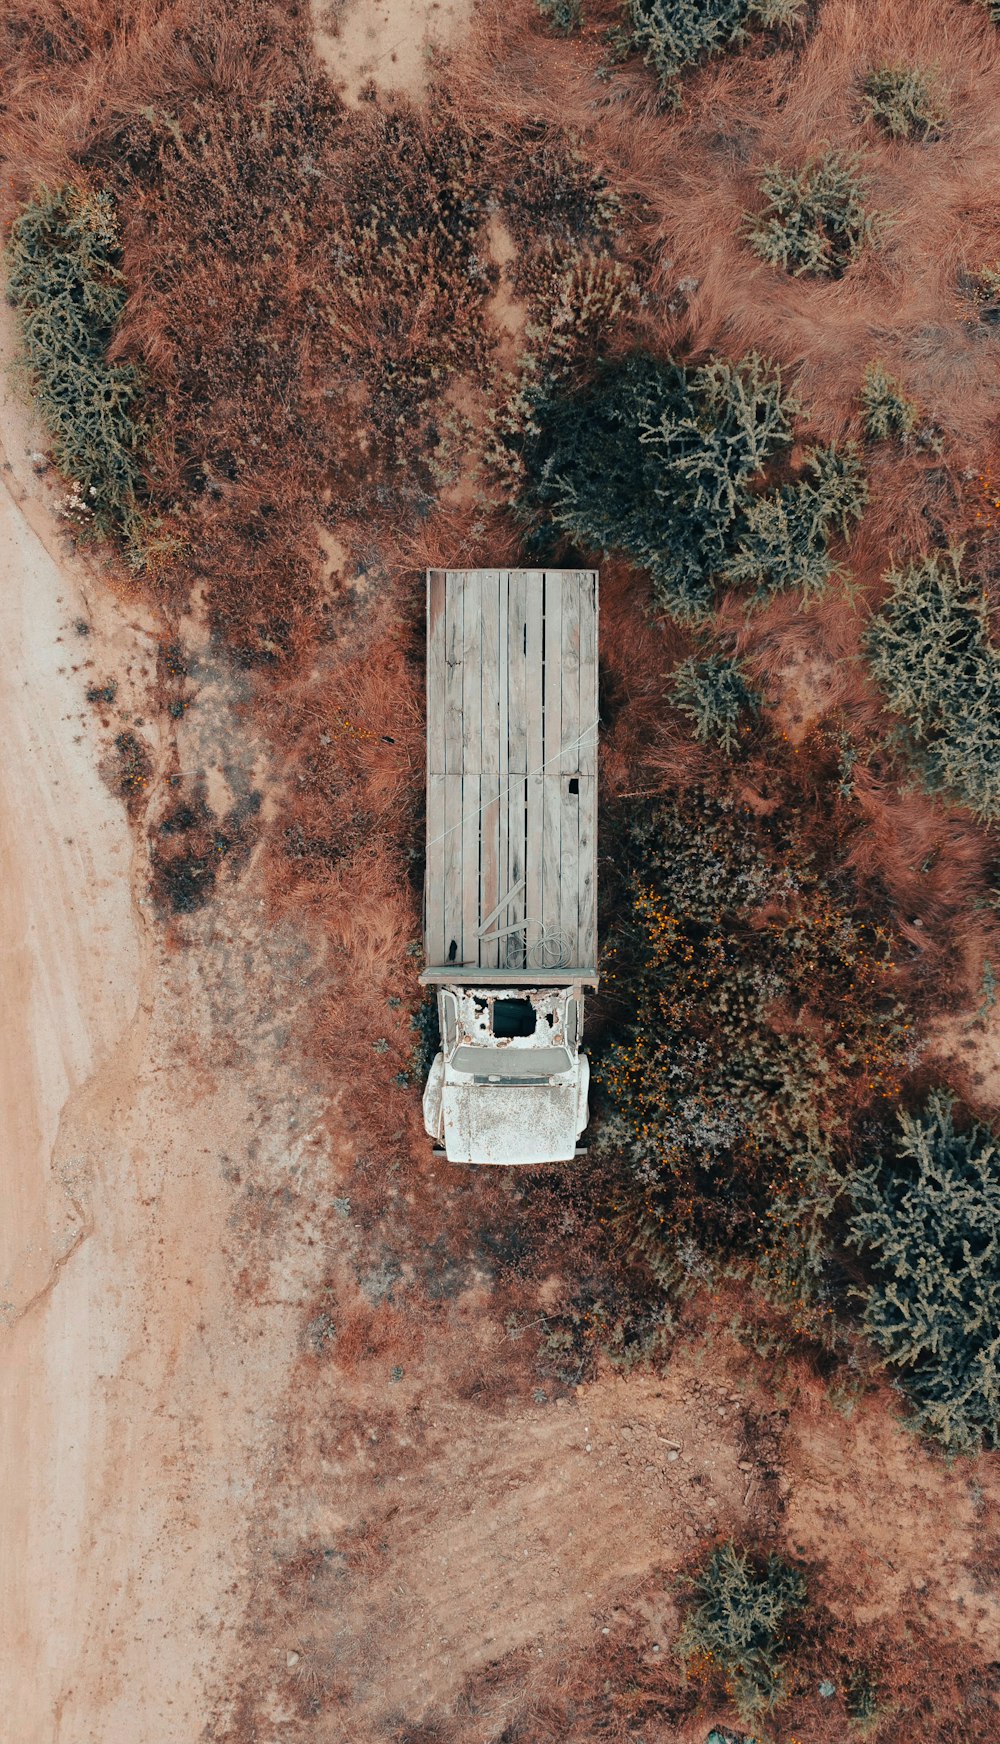 an aerial view of a truck parked on a dirt road